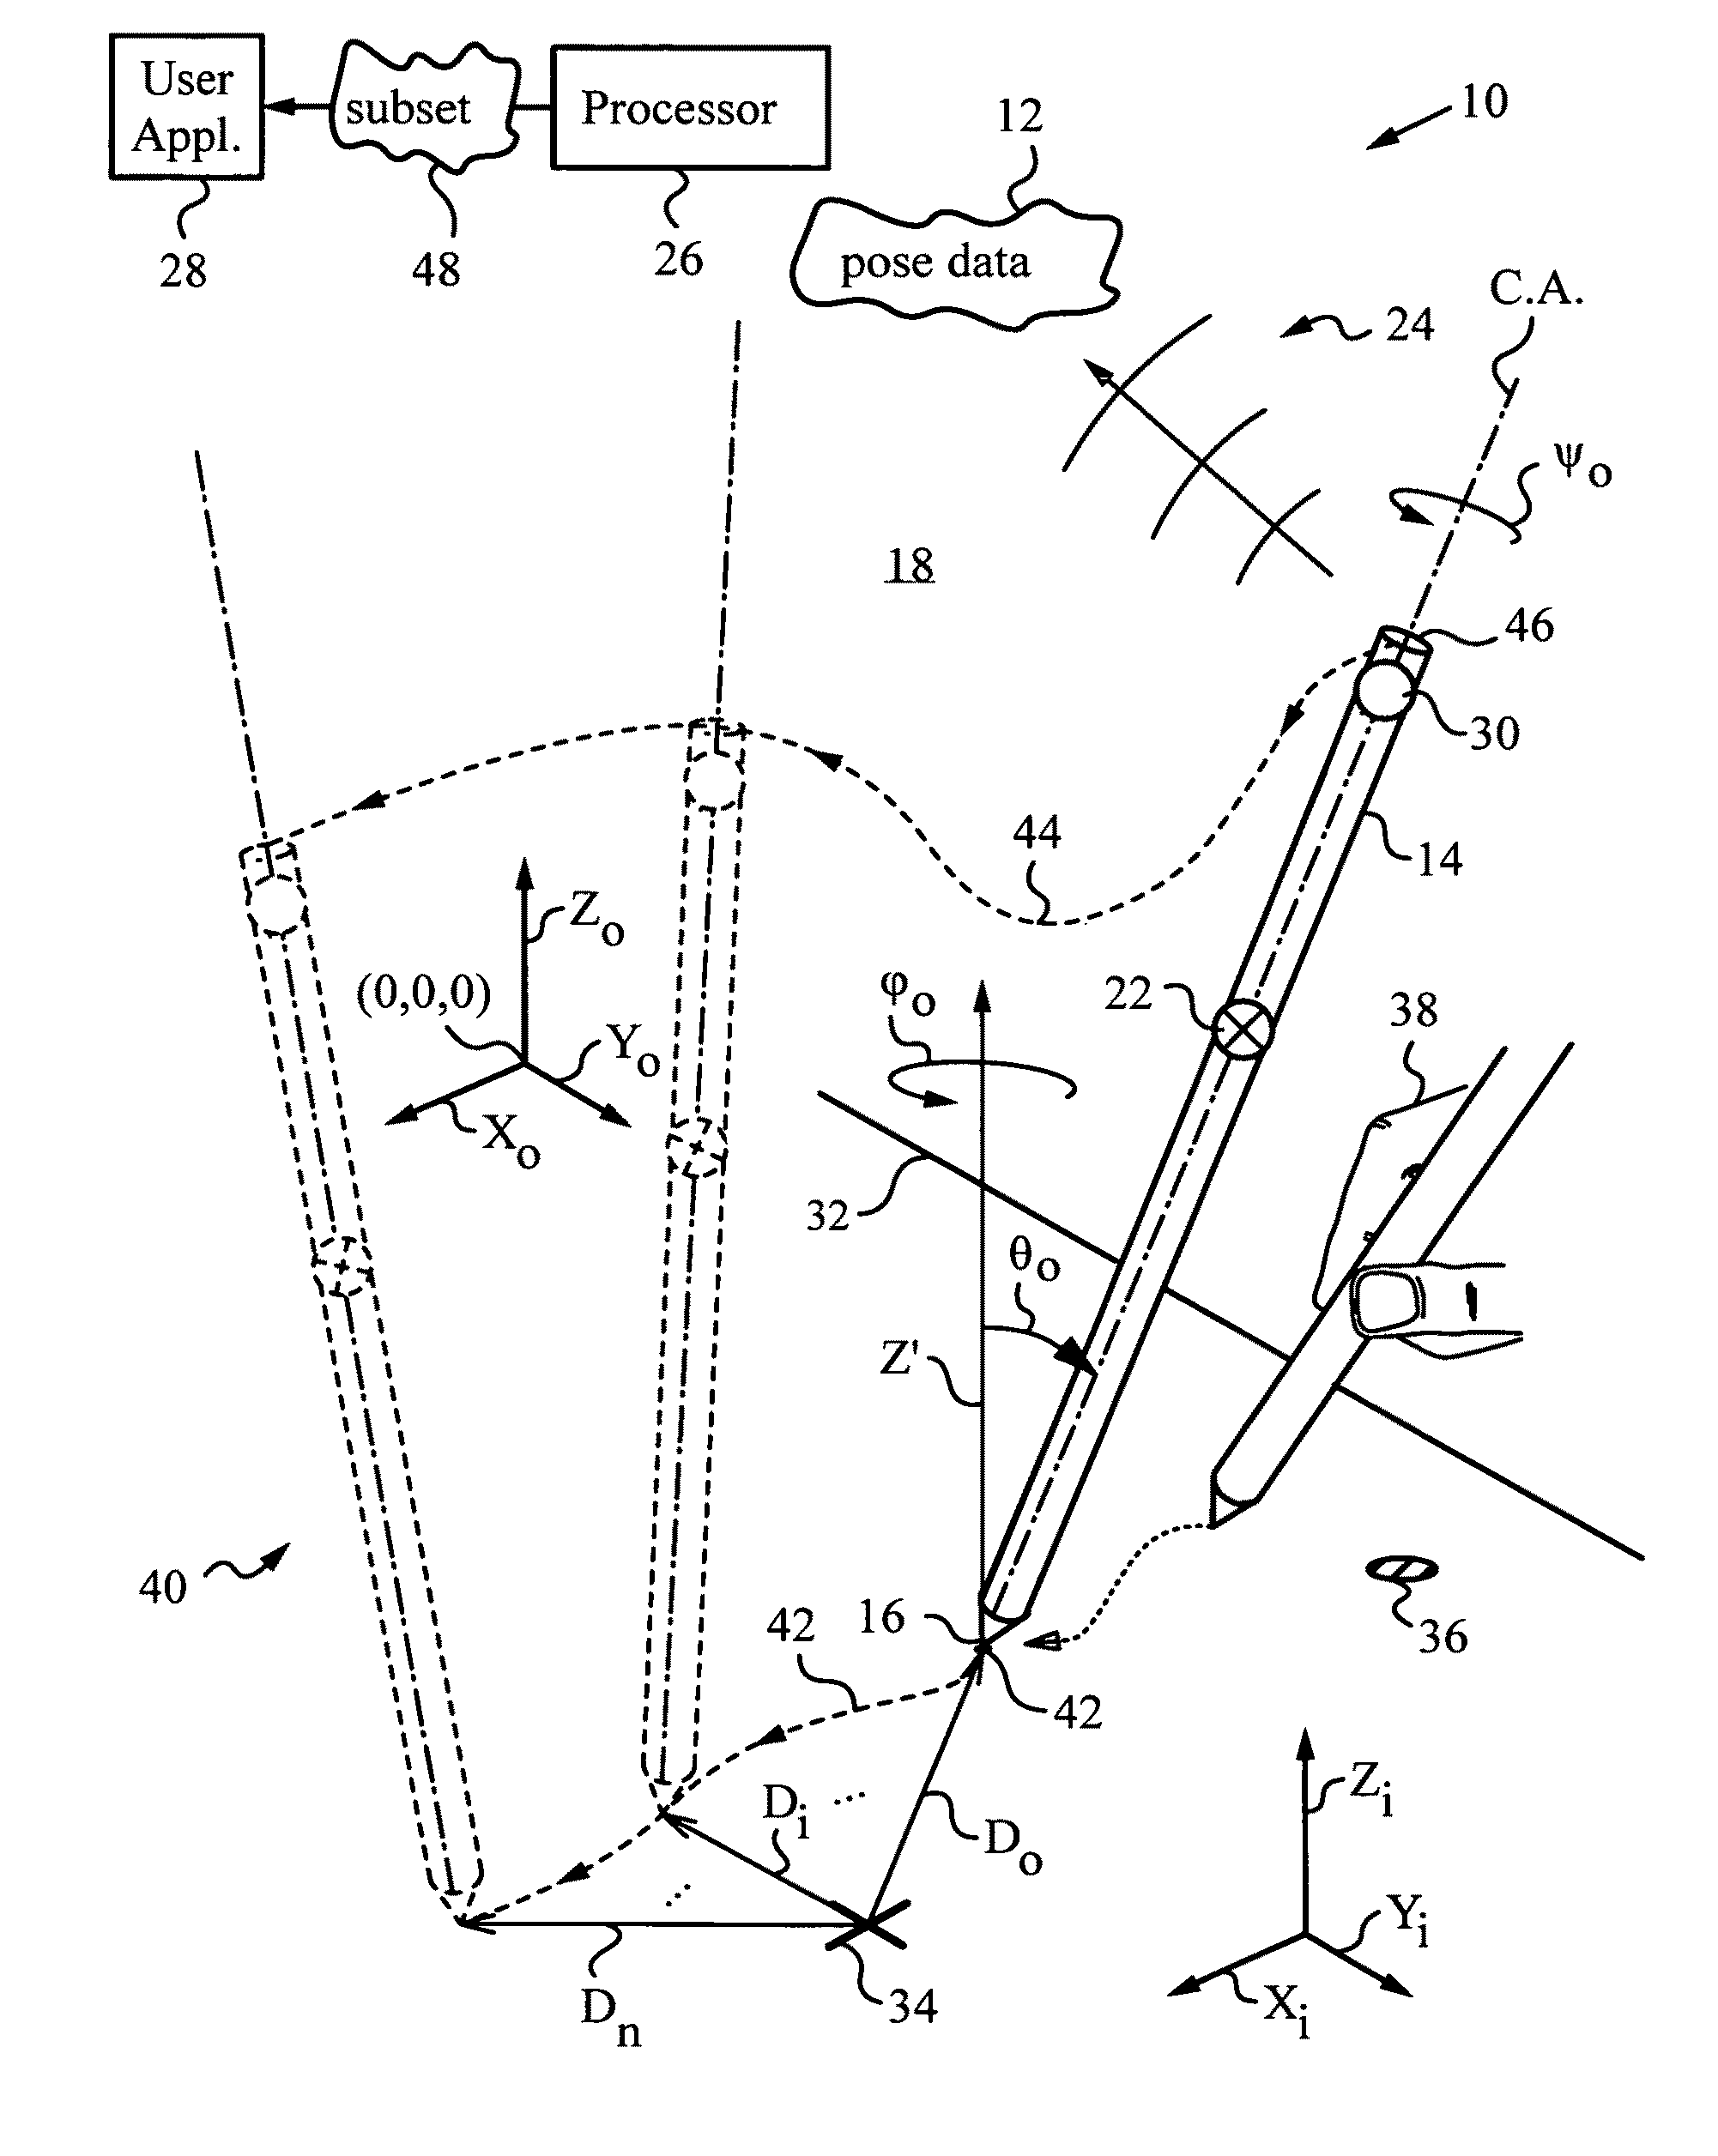 Computer interface employing a manipulated object with absolute pose detection component and a display